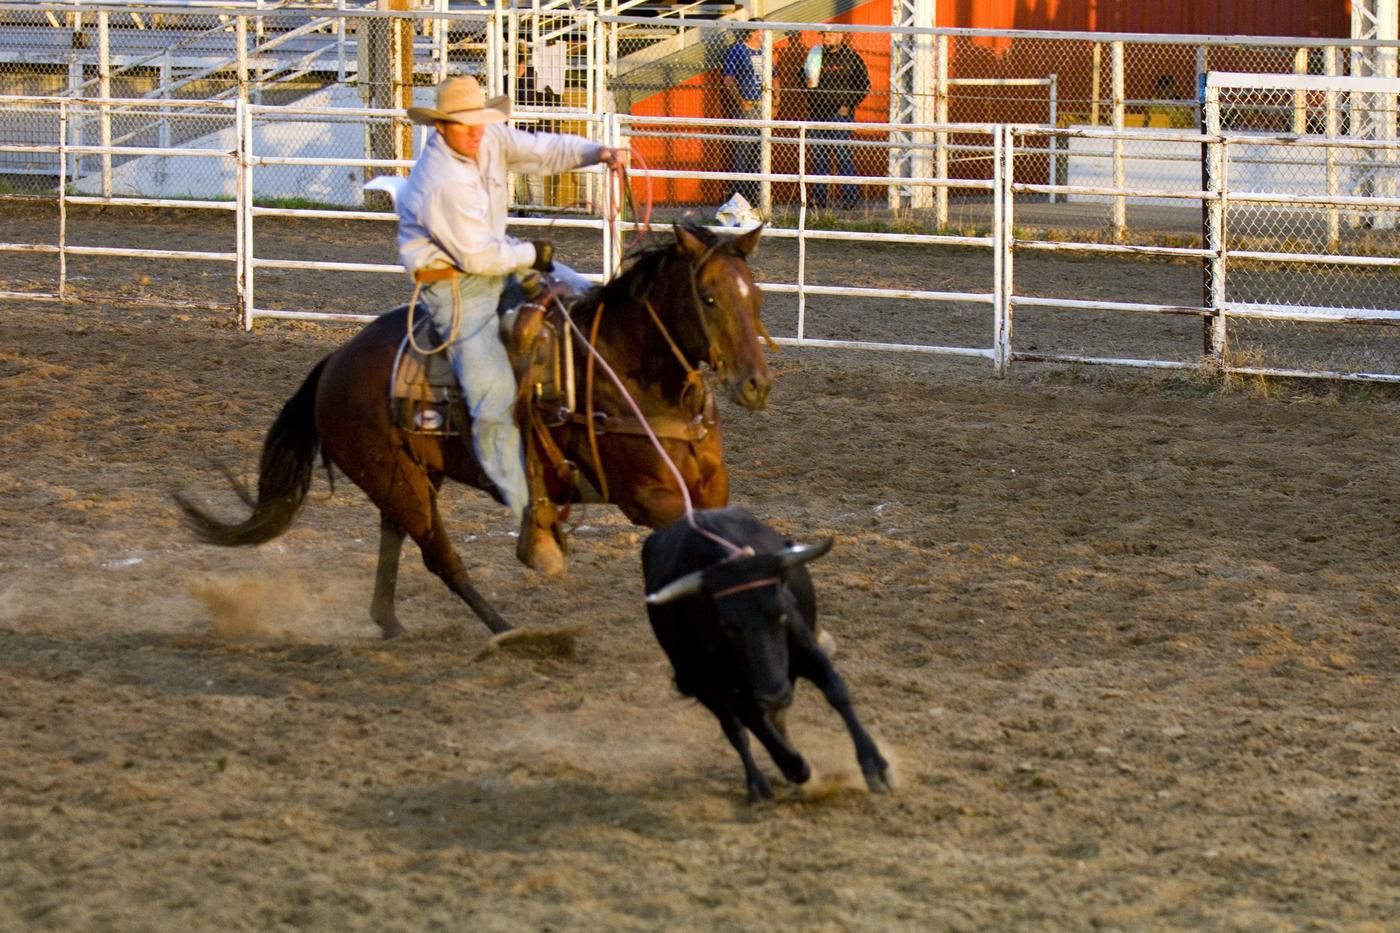 pro rodeo cowboy on horse chasing cow lasso